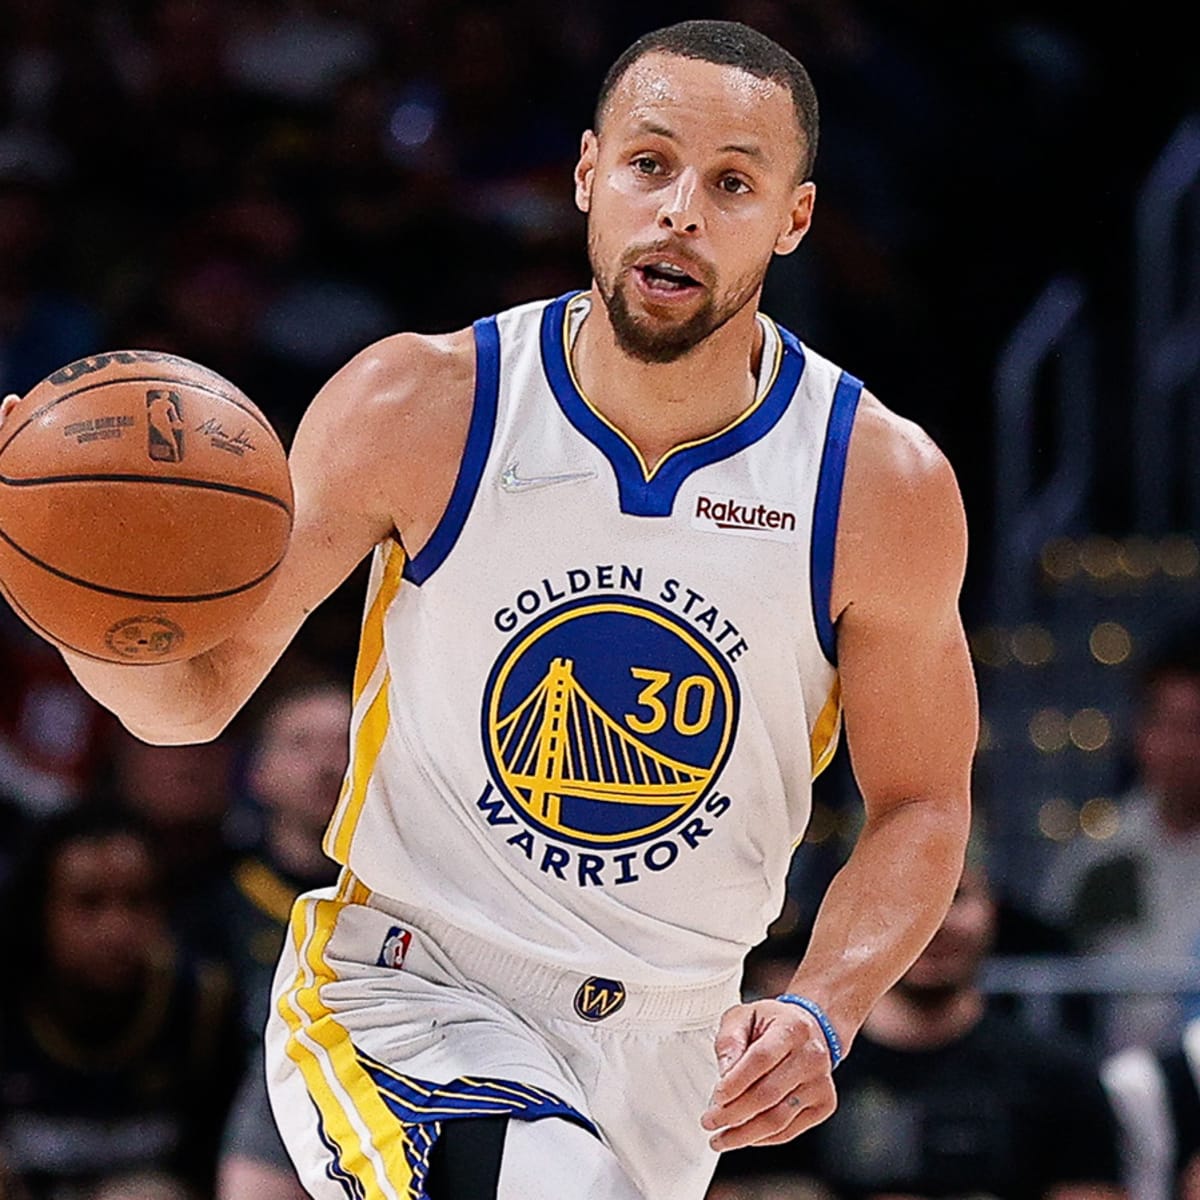 Video of Steph Curry From 2021 Goes Viral After Warriors Reach NBA Finals